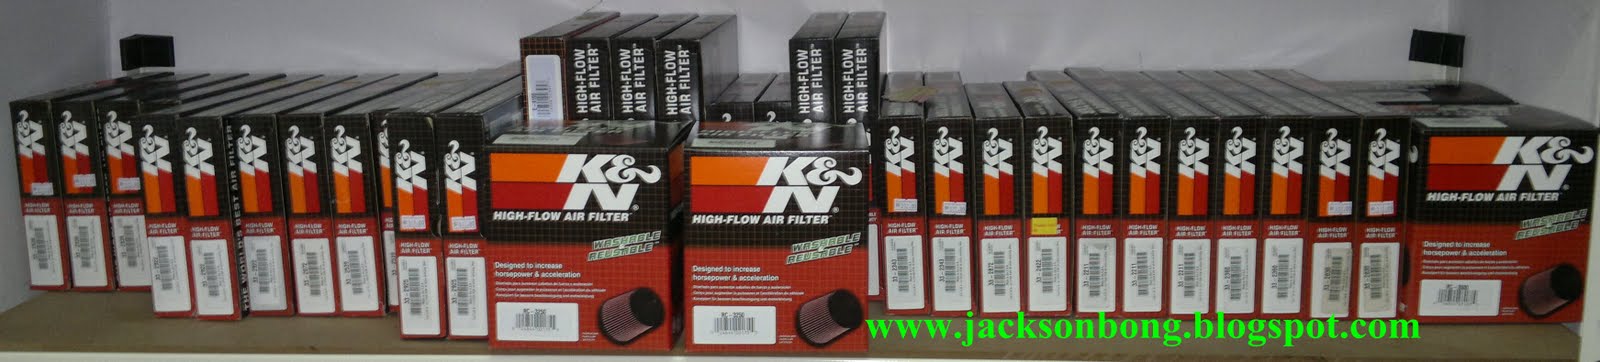 Pro-ride Motorsports: K & N High-Flow Air Filters: Ready 